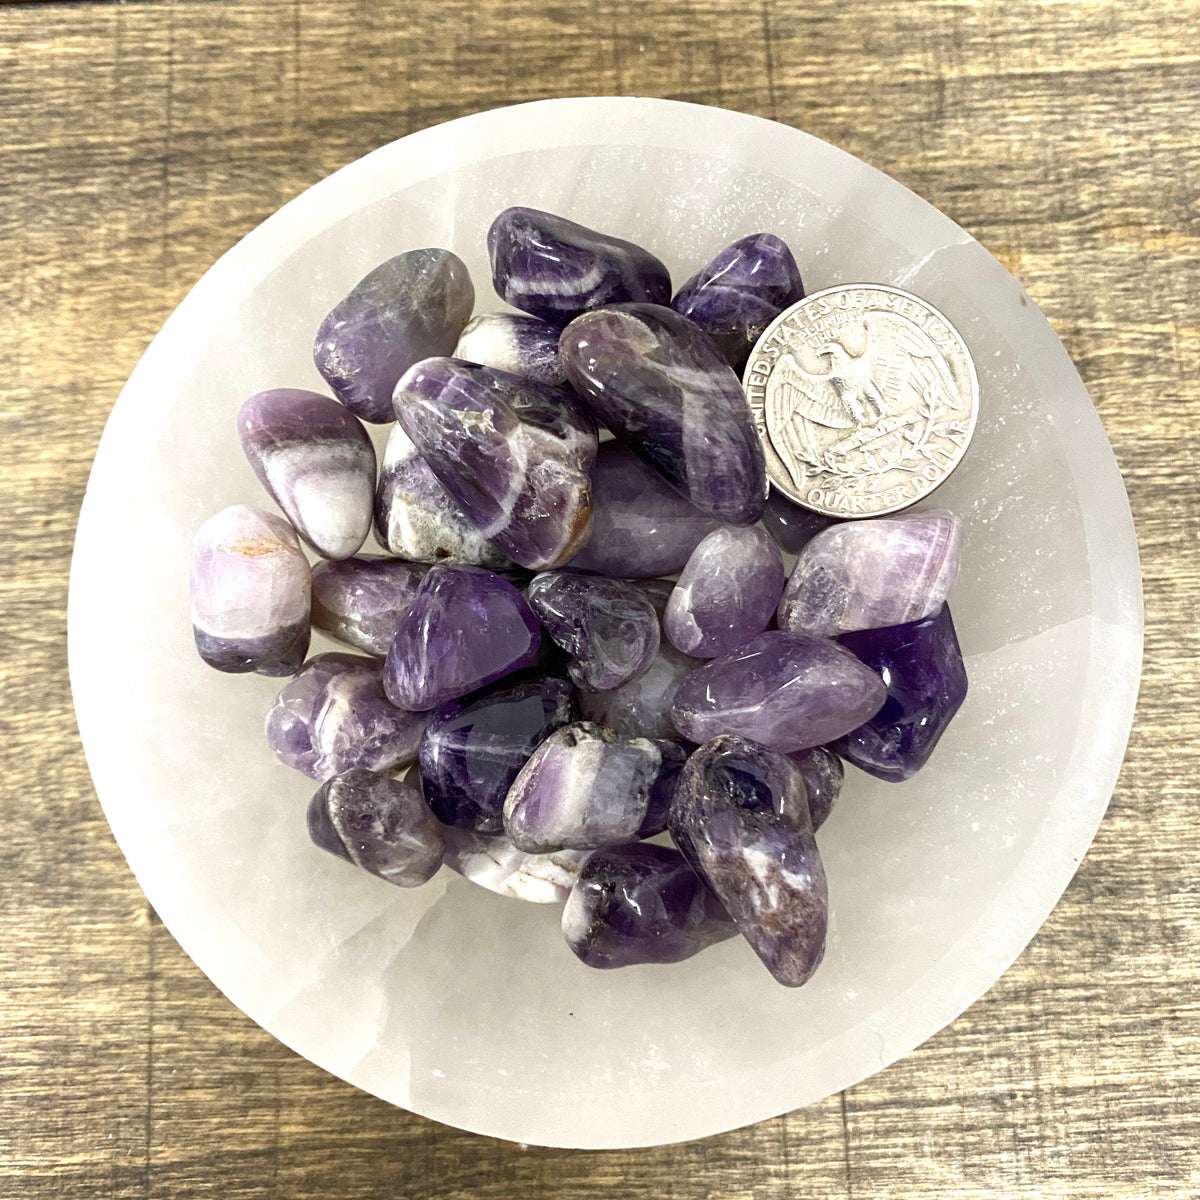 Overhead comparison shot of a US quarter coin and various Chevron Amethyst tumbled stones in a small bowl.